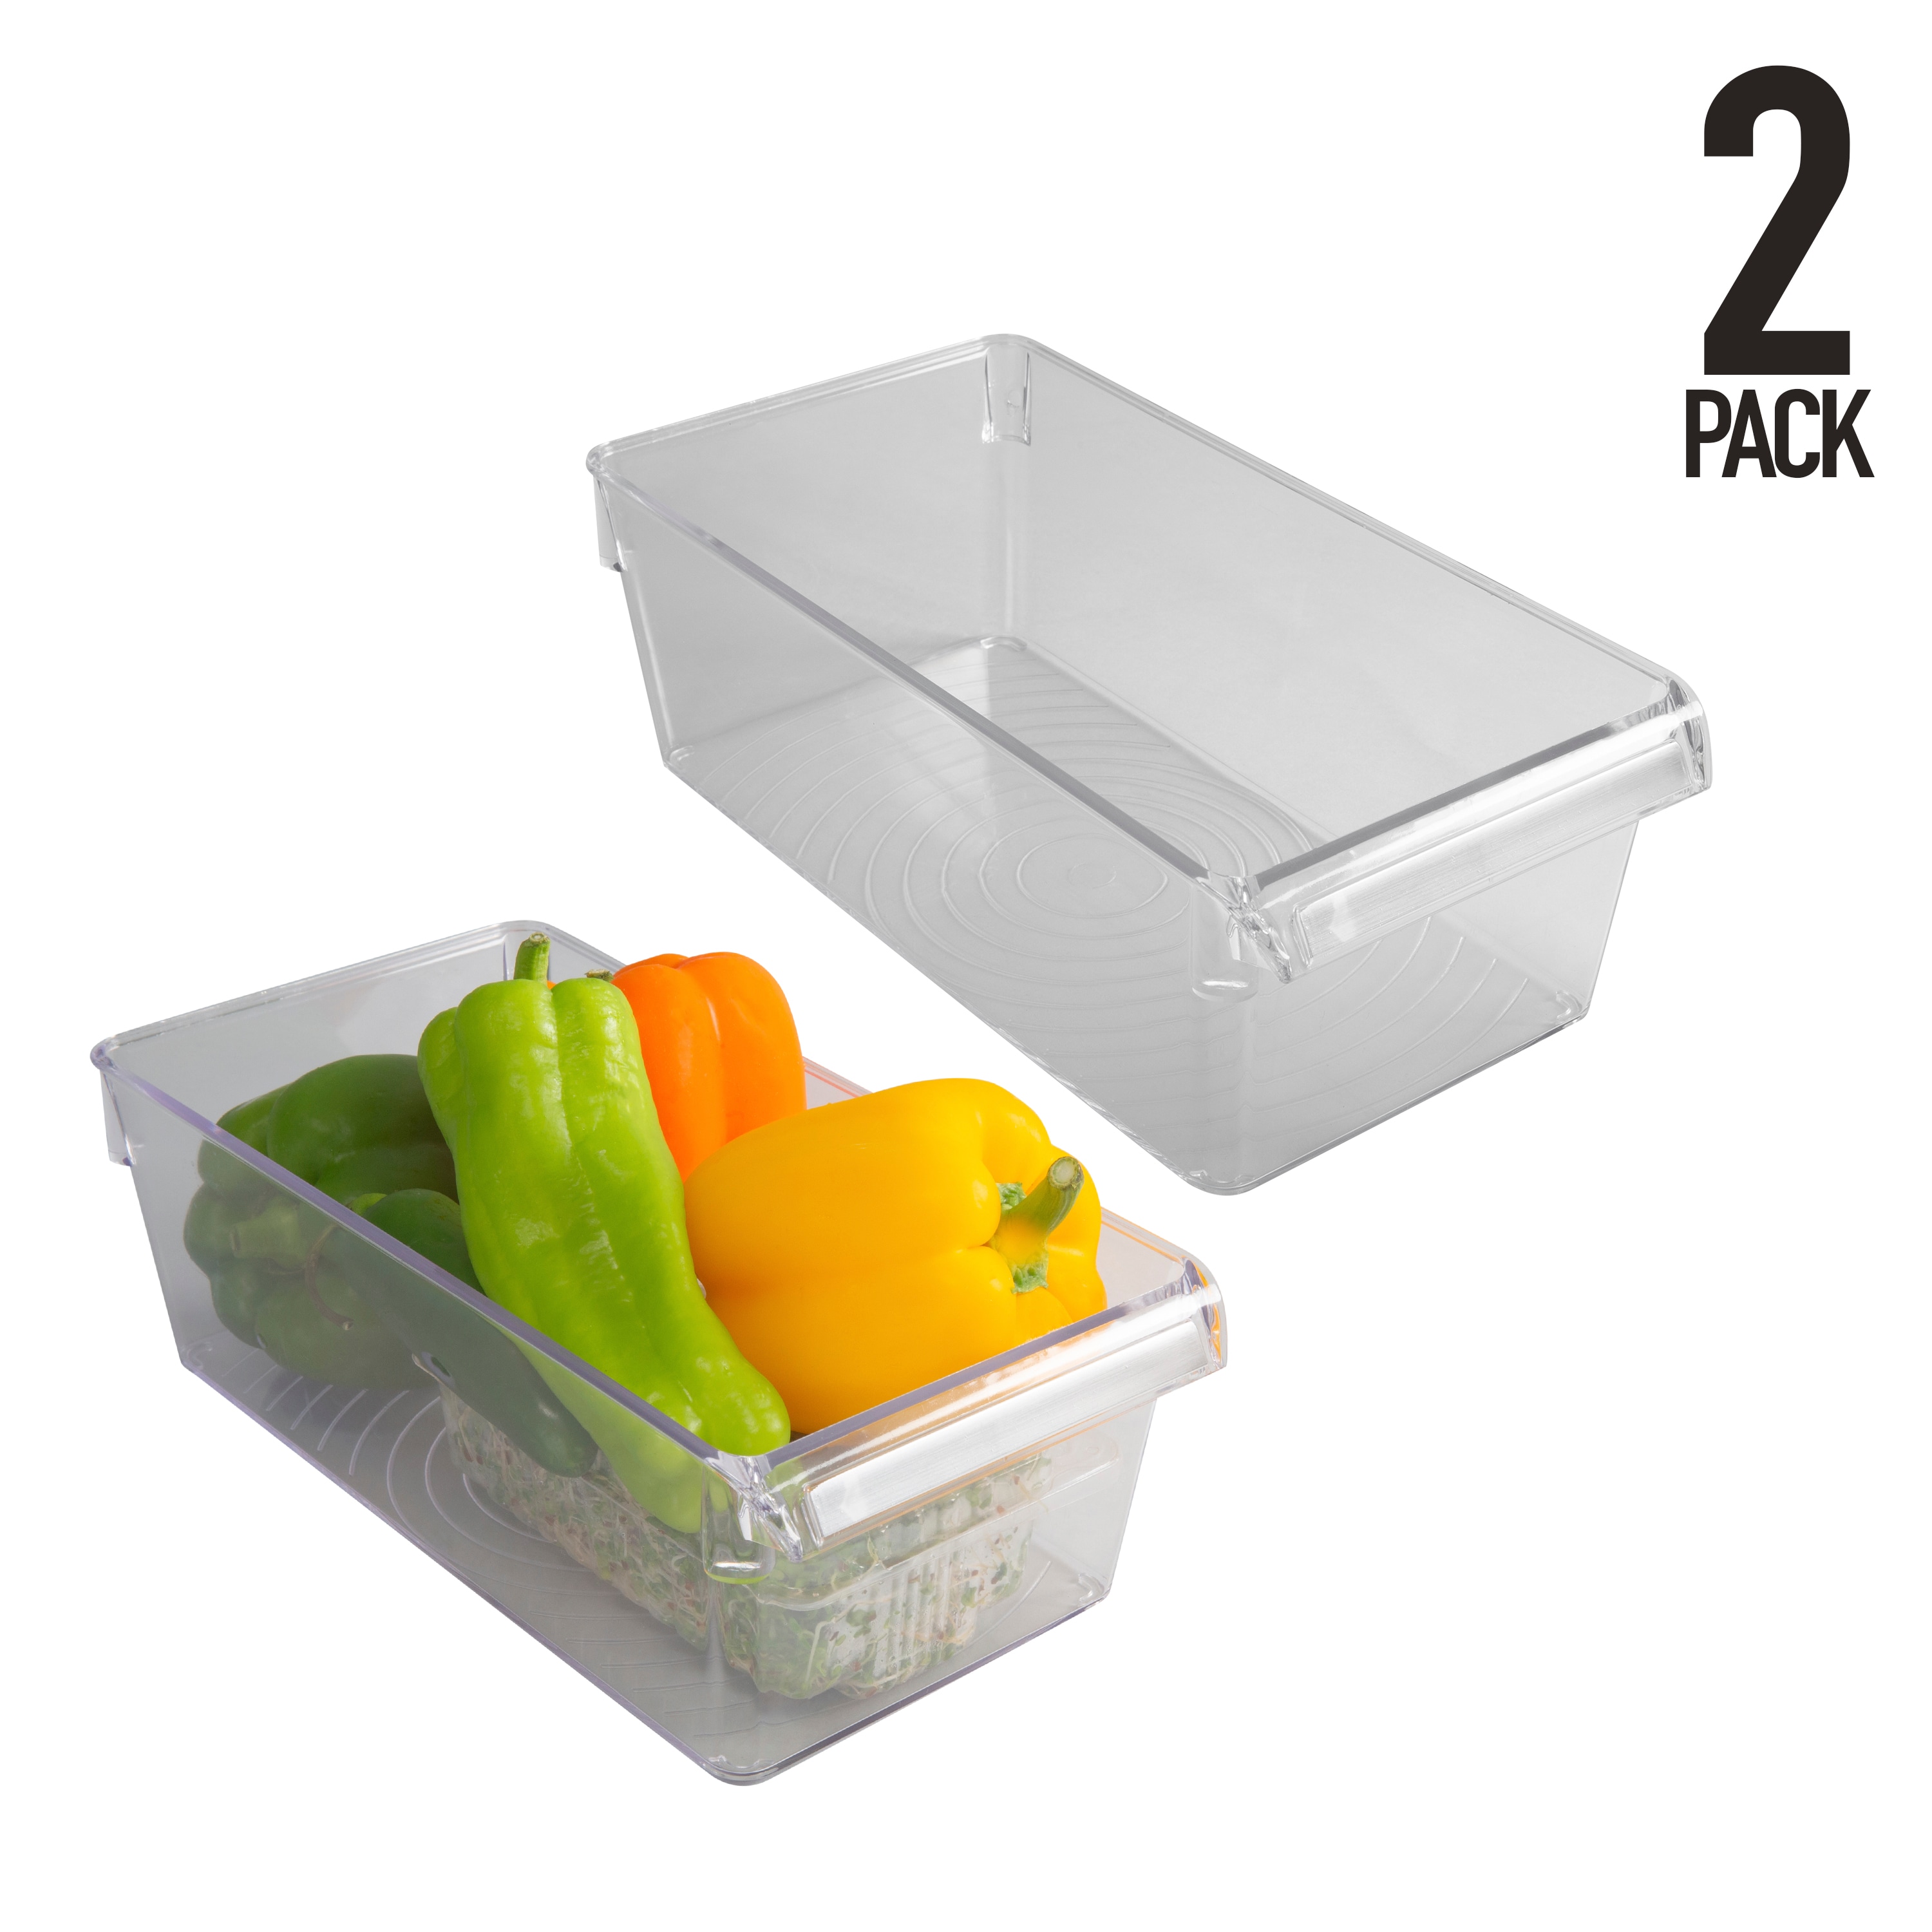 iDesign Multisize Plastic Bpa-free Reusable Food Storage Container